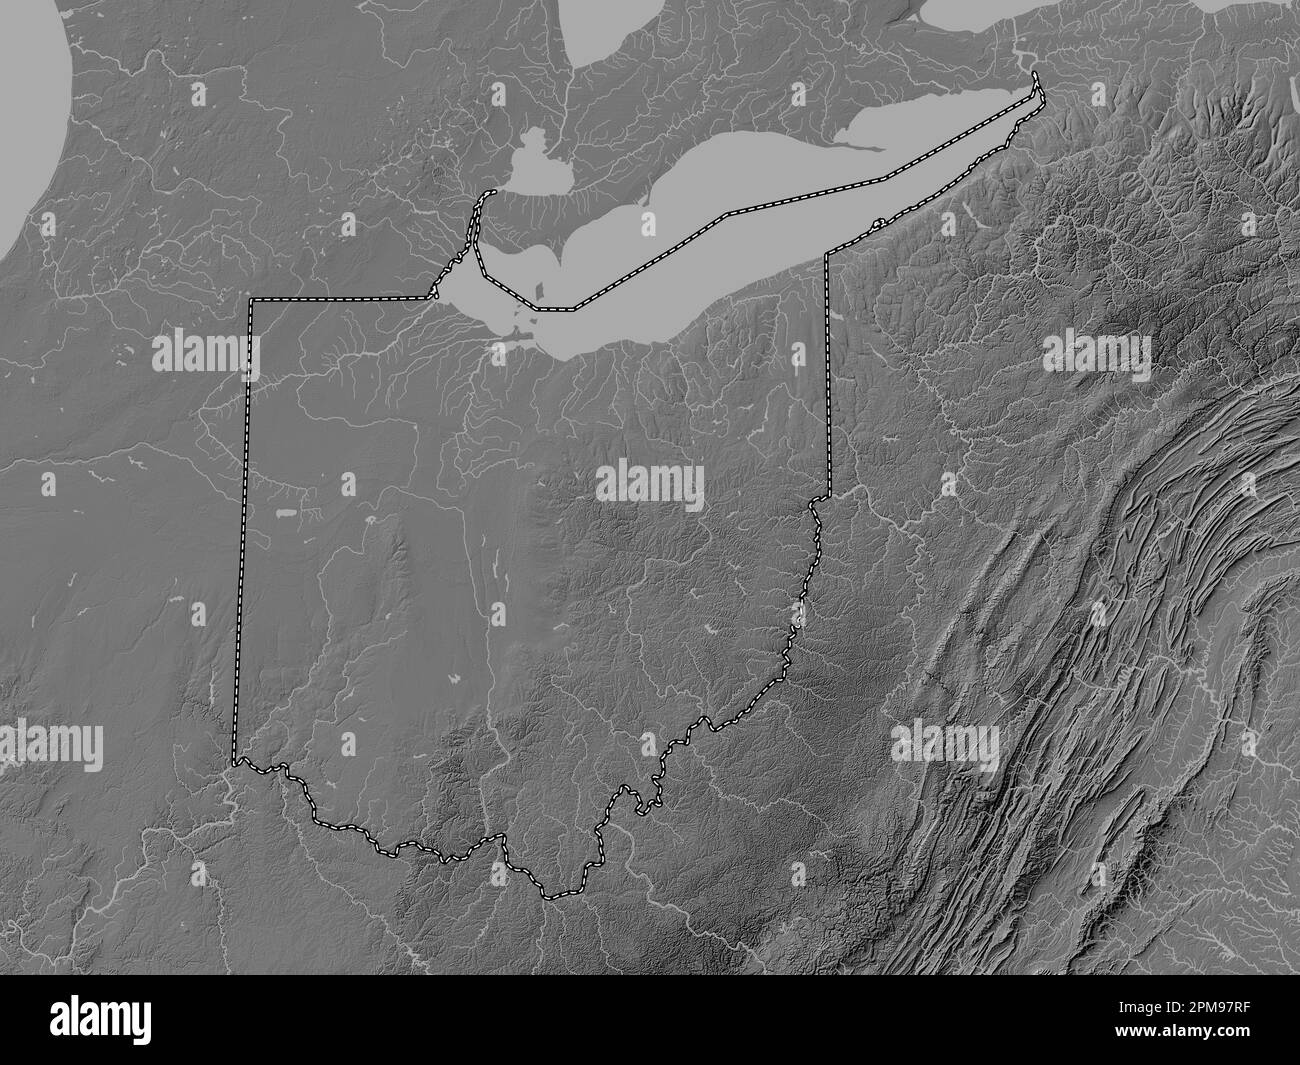 Ohio, state of United States of America. Bilevel elevation map with lakes and rivers Stock Photo